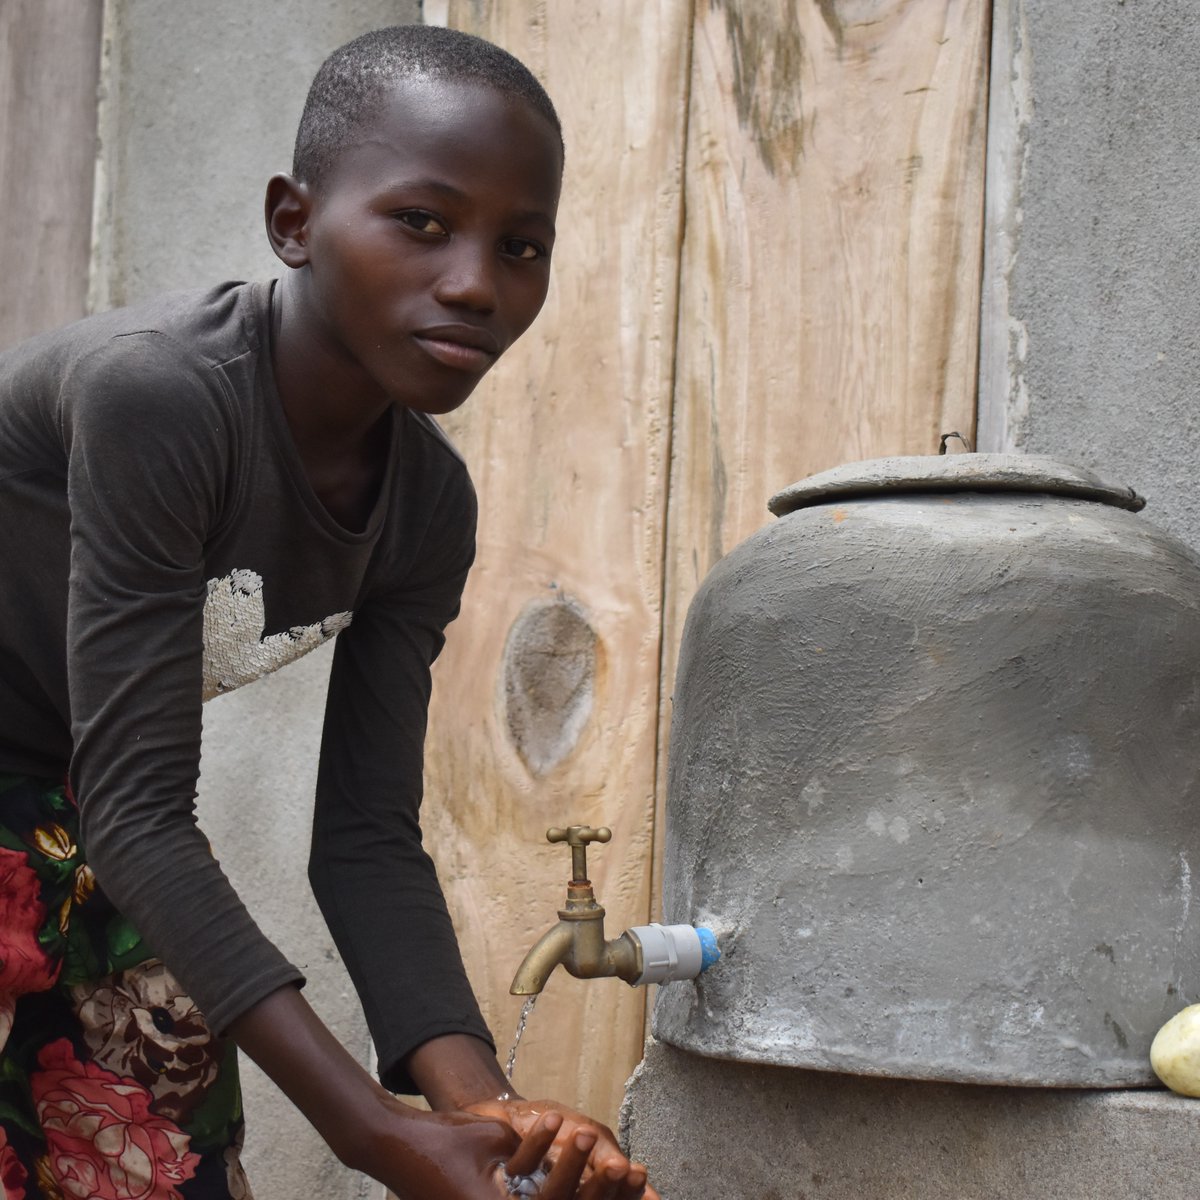 What does clean water mean to you? 

For the community of Bombohun #sierraleone, it means a chance between life and death. Did you know that 50% of deaths from diarrhea are preventable with proper handwashing techniques? 

#handwashing #cleanwater #WASHprojects